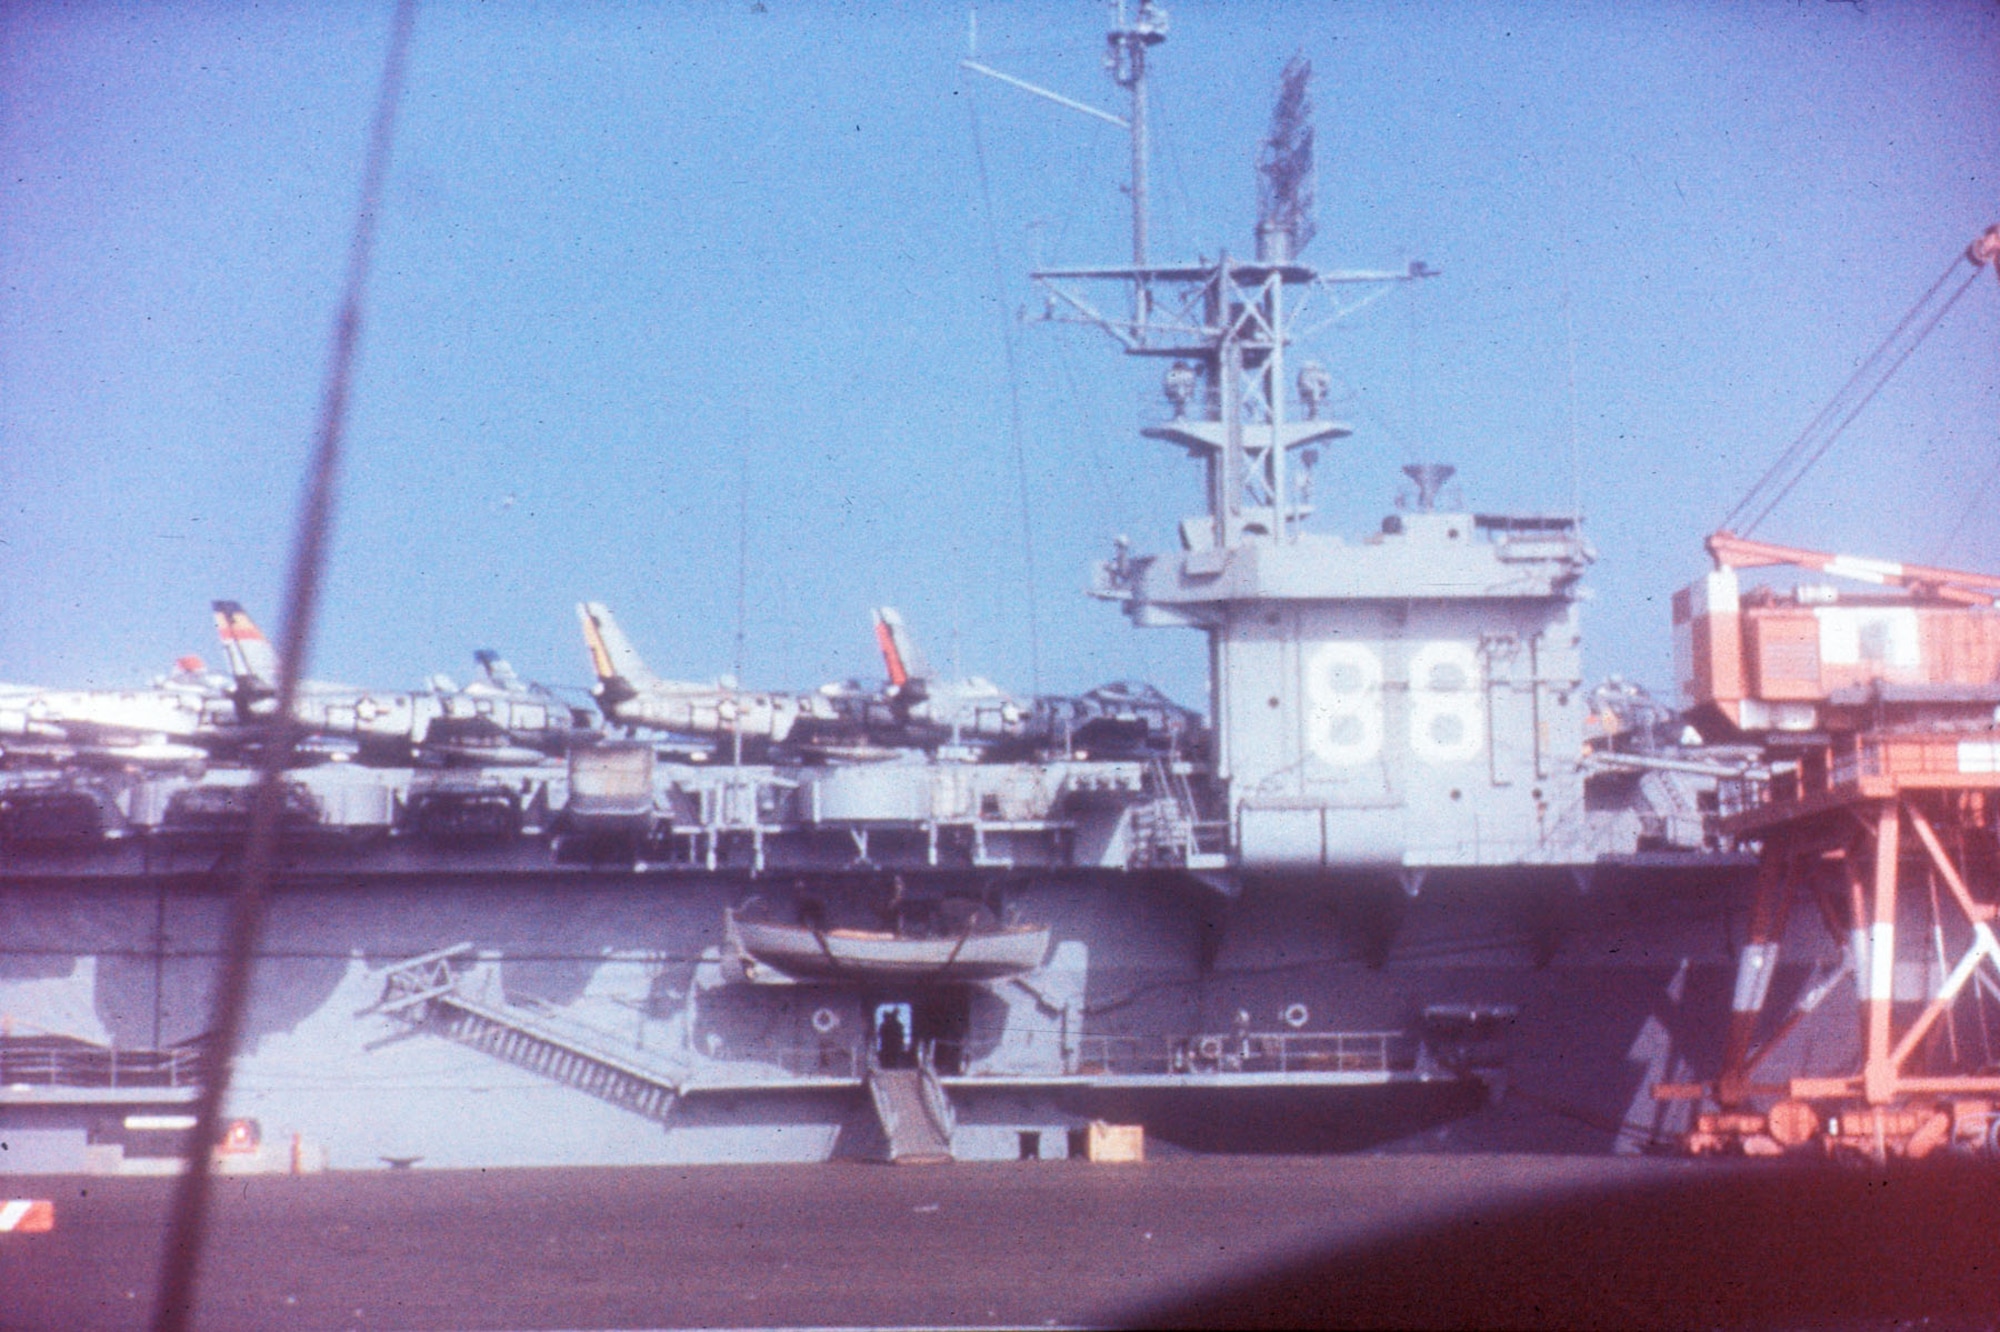 The first F-86As arrived in Korea in November 1950 aboard the carrier USS Cape Esperance. (U.S. Air Force photo)